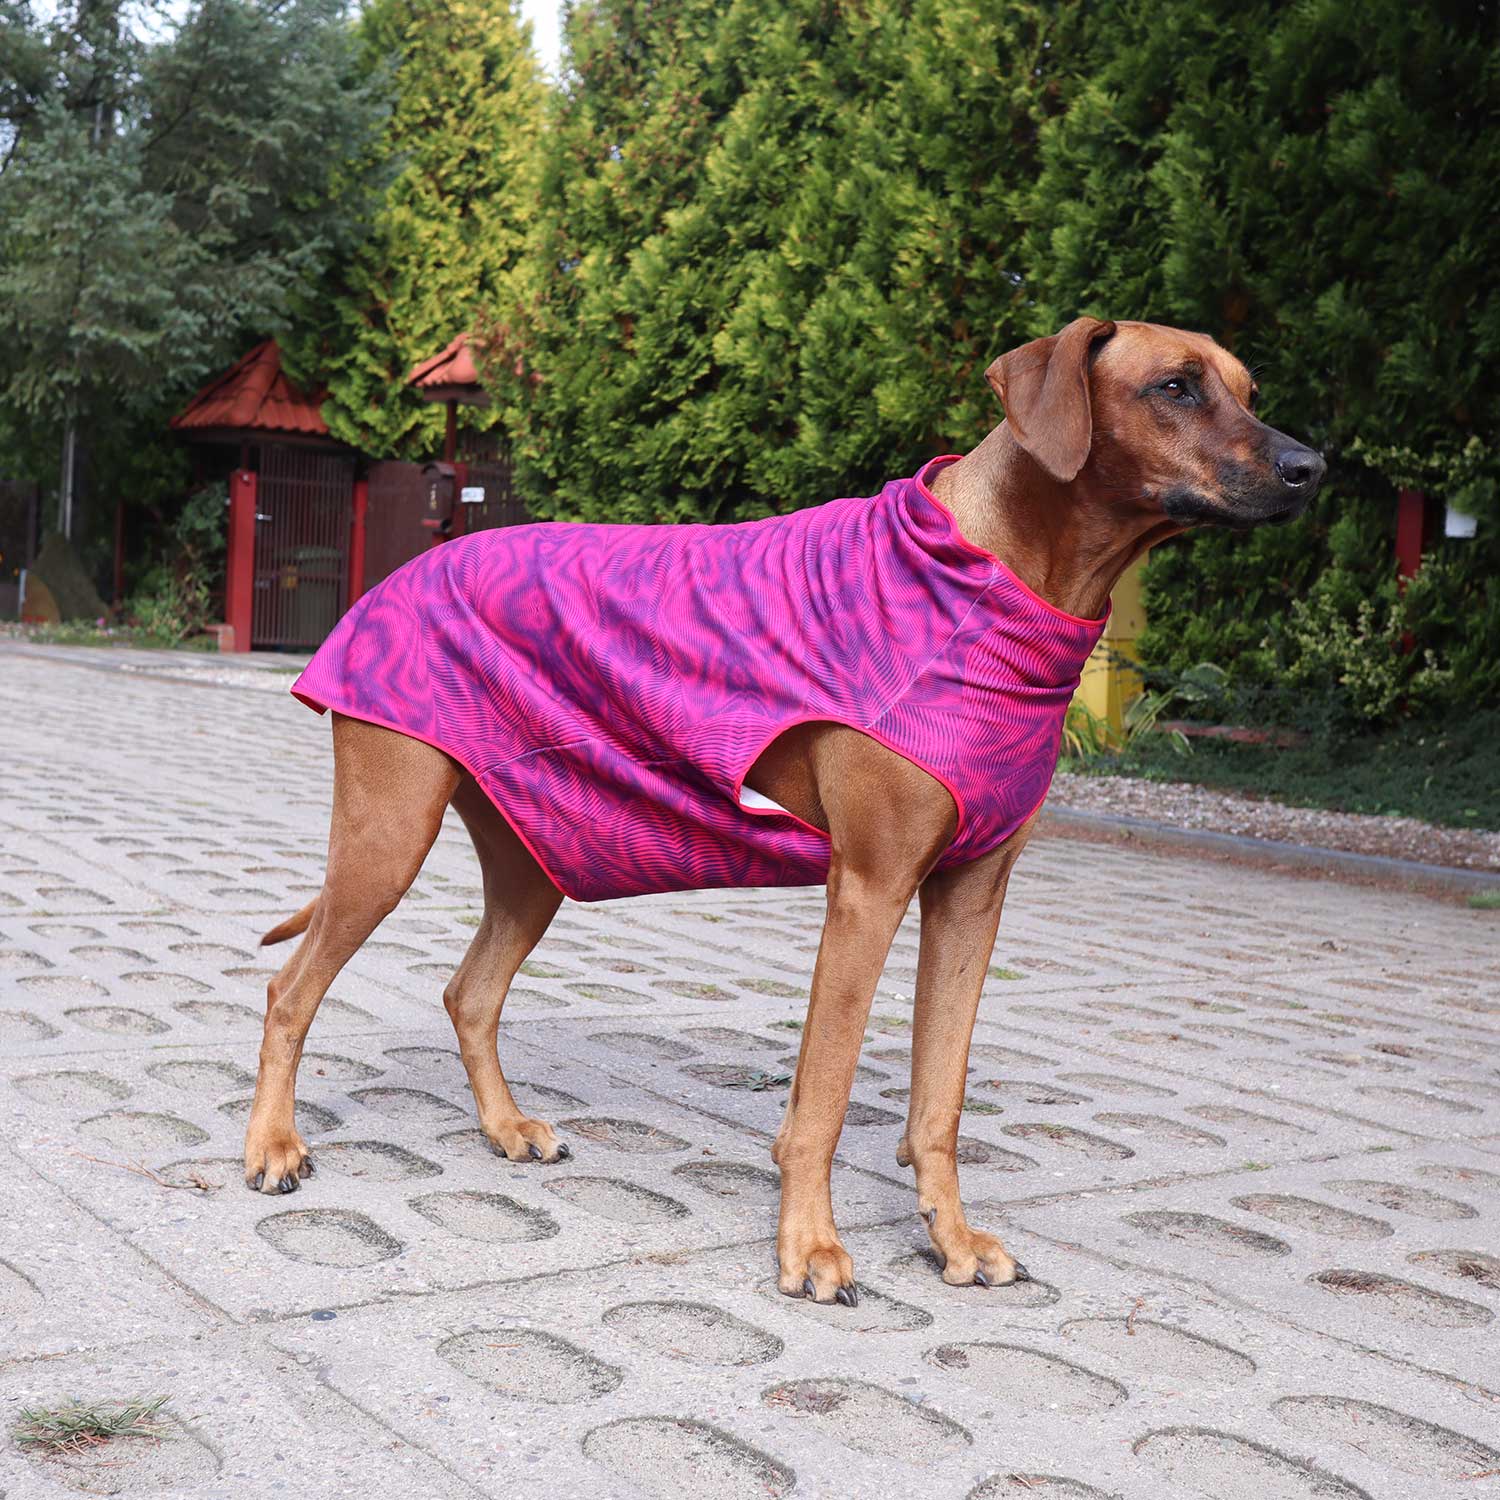 Lucy Rhodesian Ridgeback on her estate road in a warm blouse with a gorgeous healing zigzag pattern. Made to keep warm on cold days.